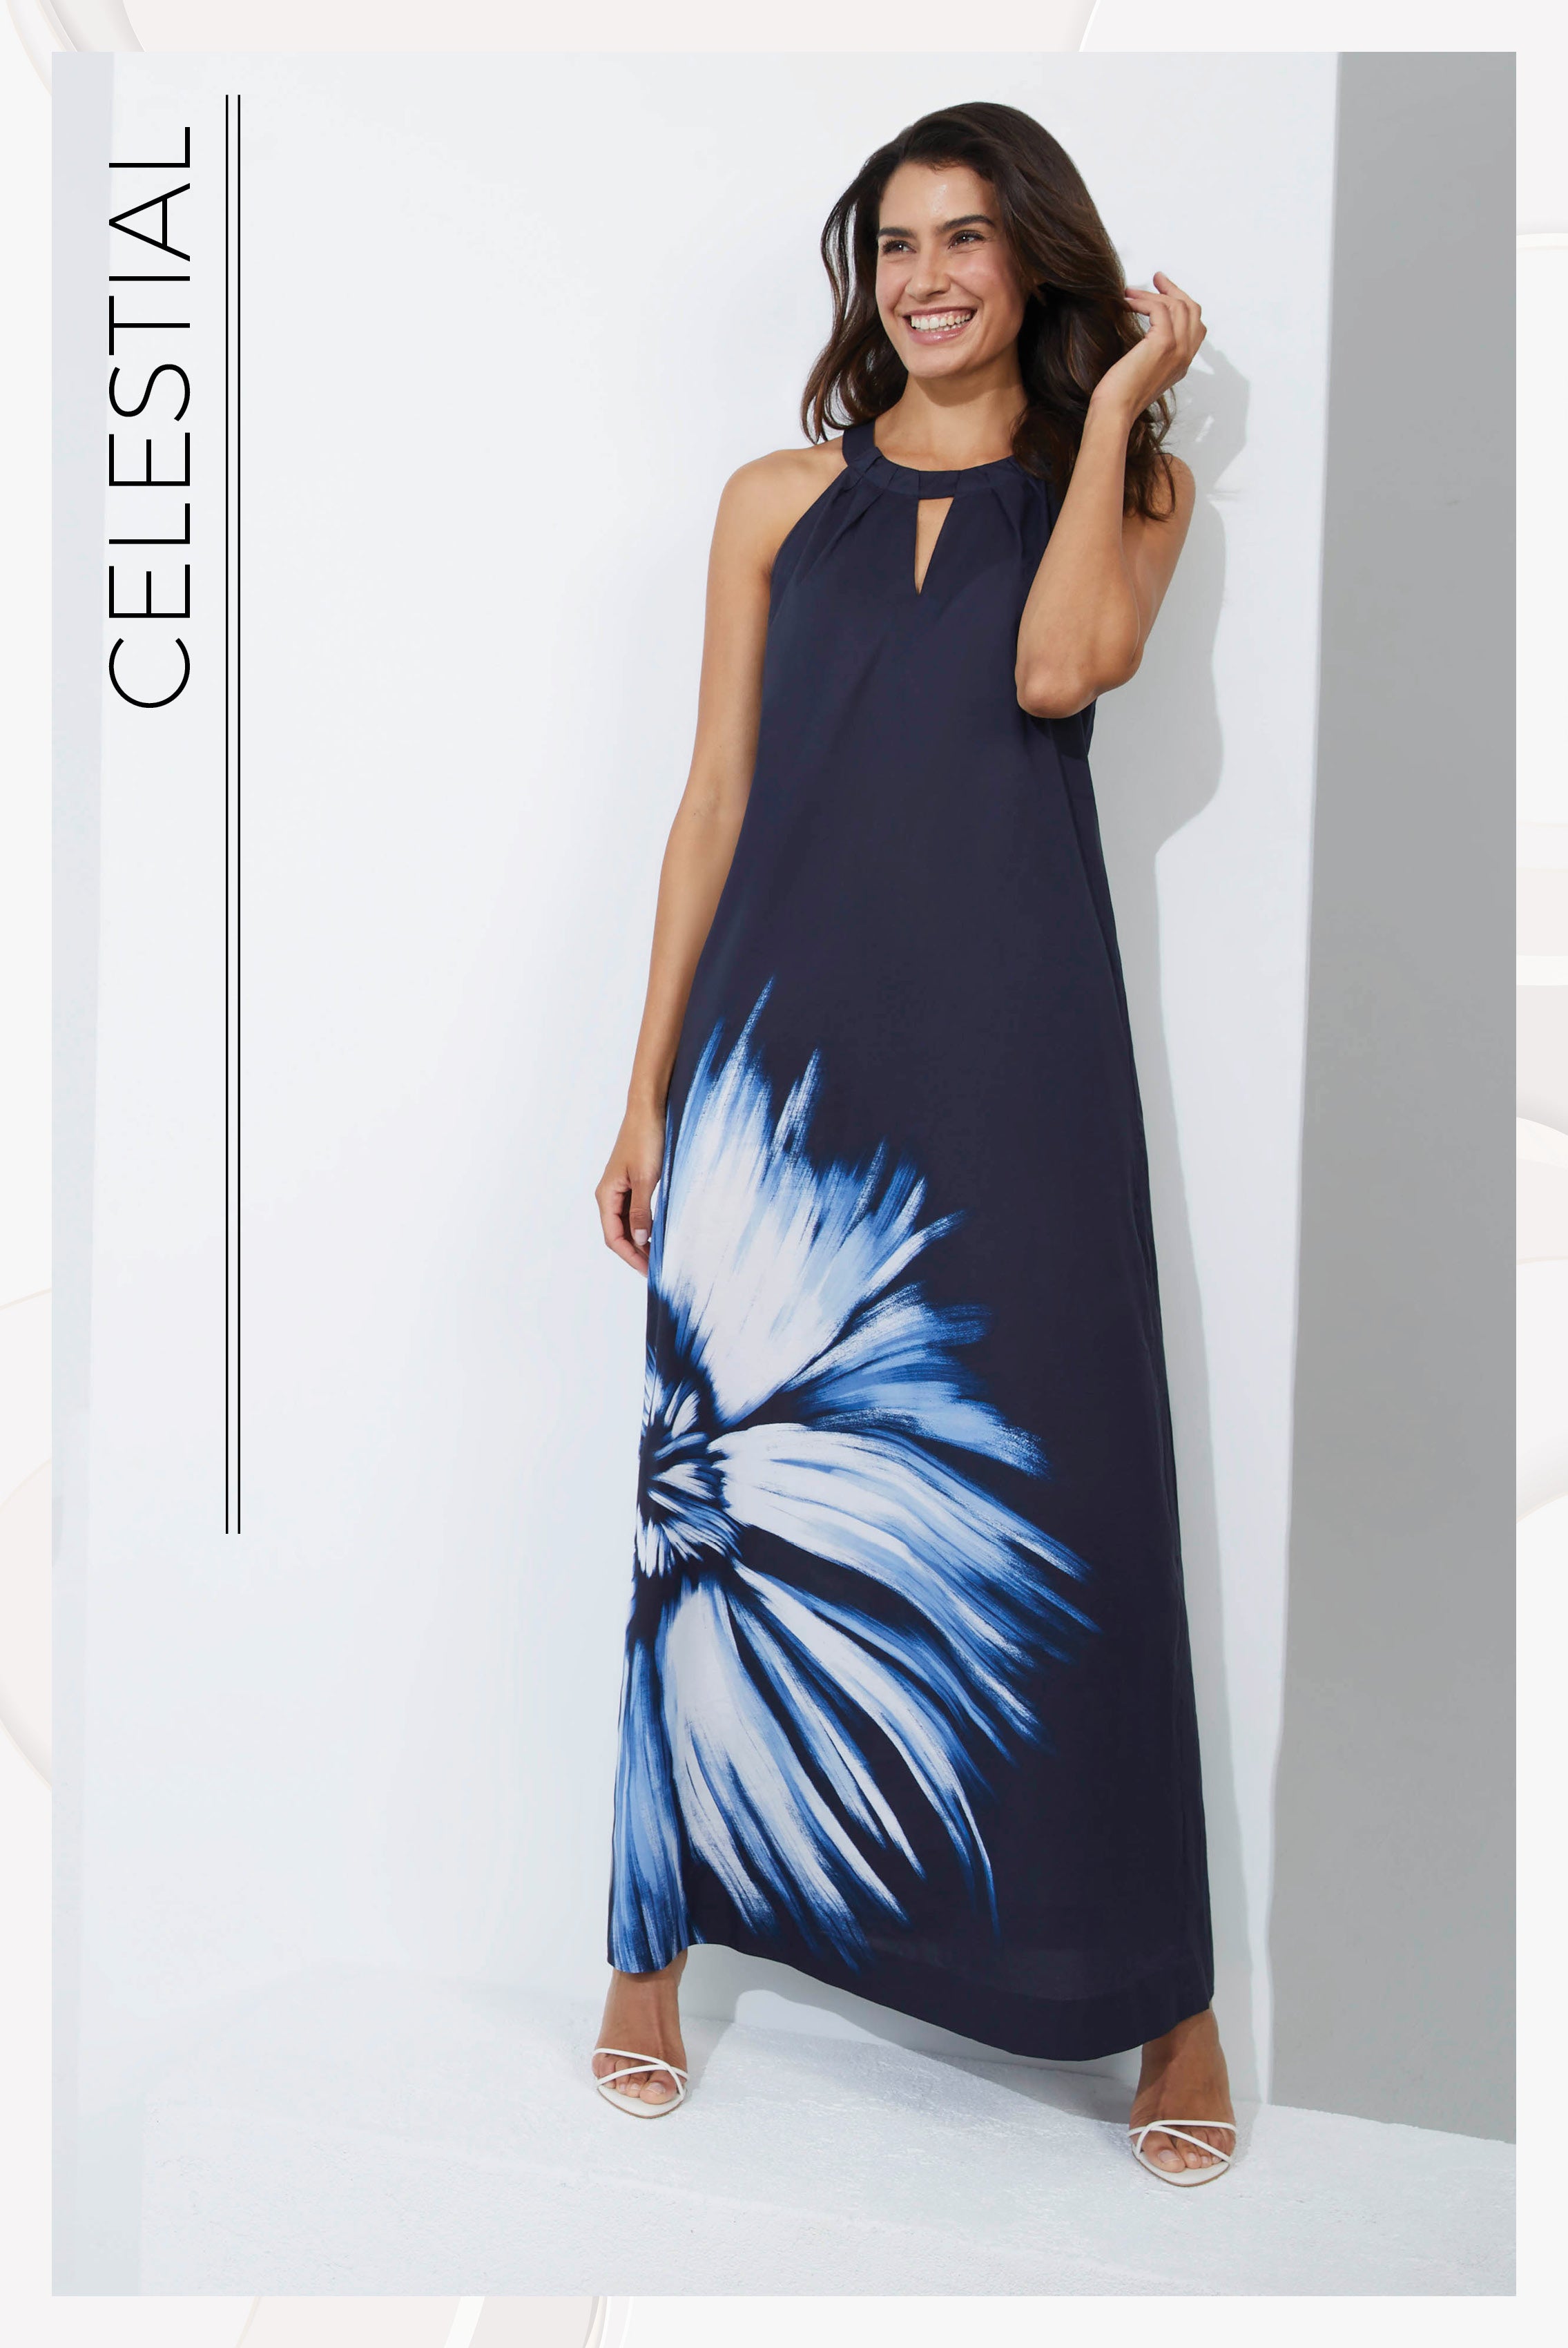 Photo of a model wearing the Celestial dress, a floral print cotton voile halter maxi dress.